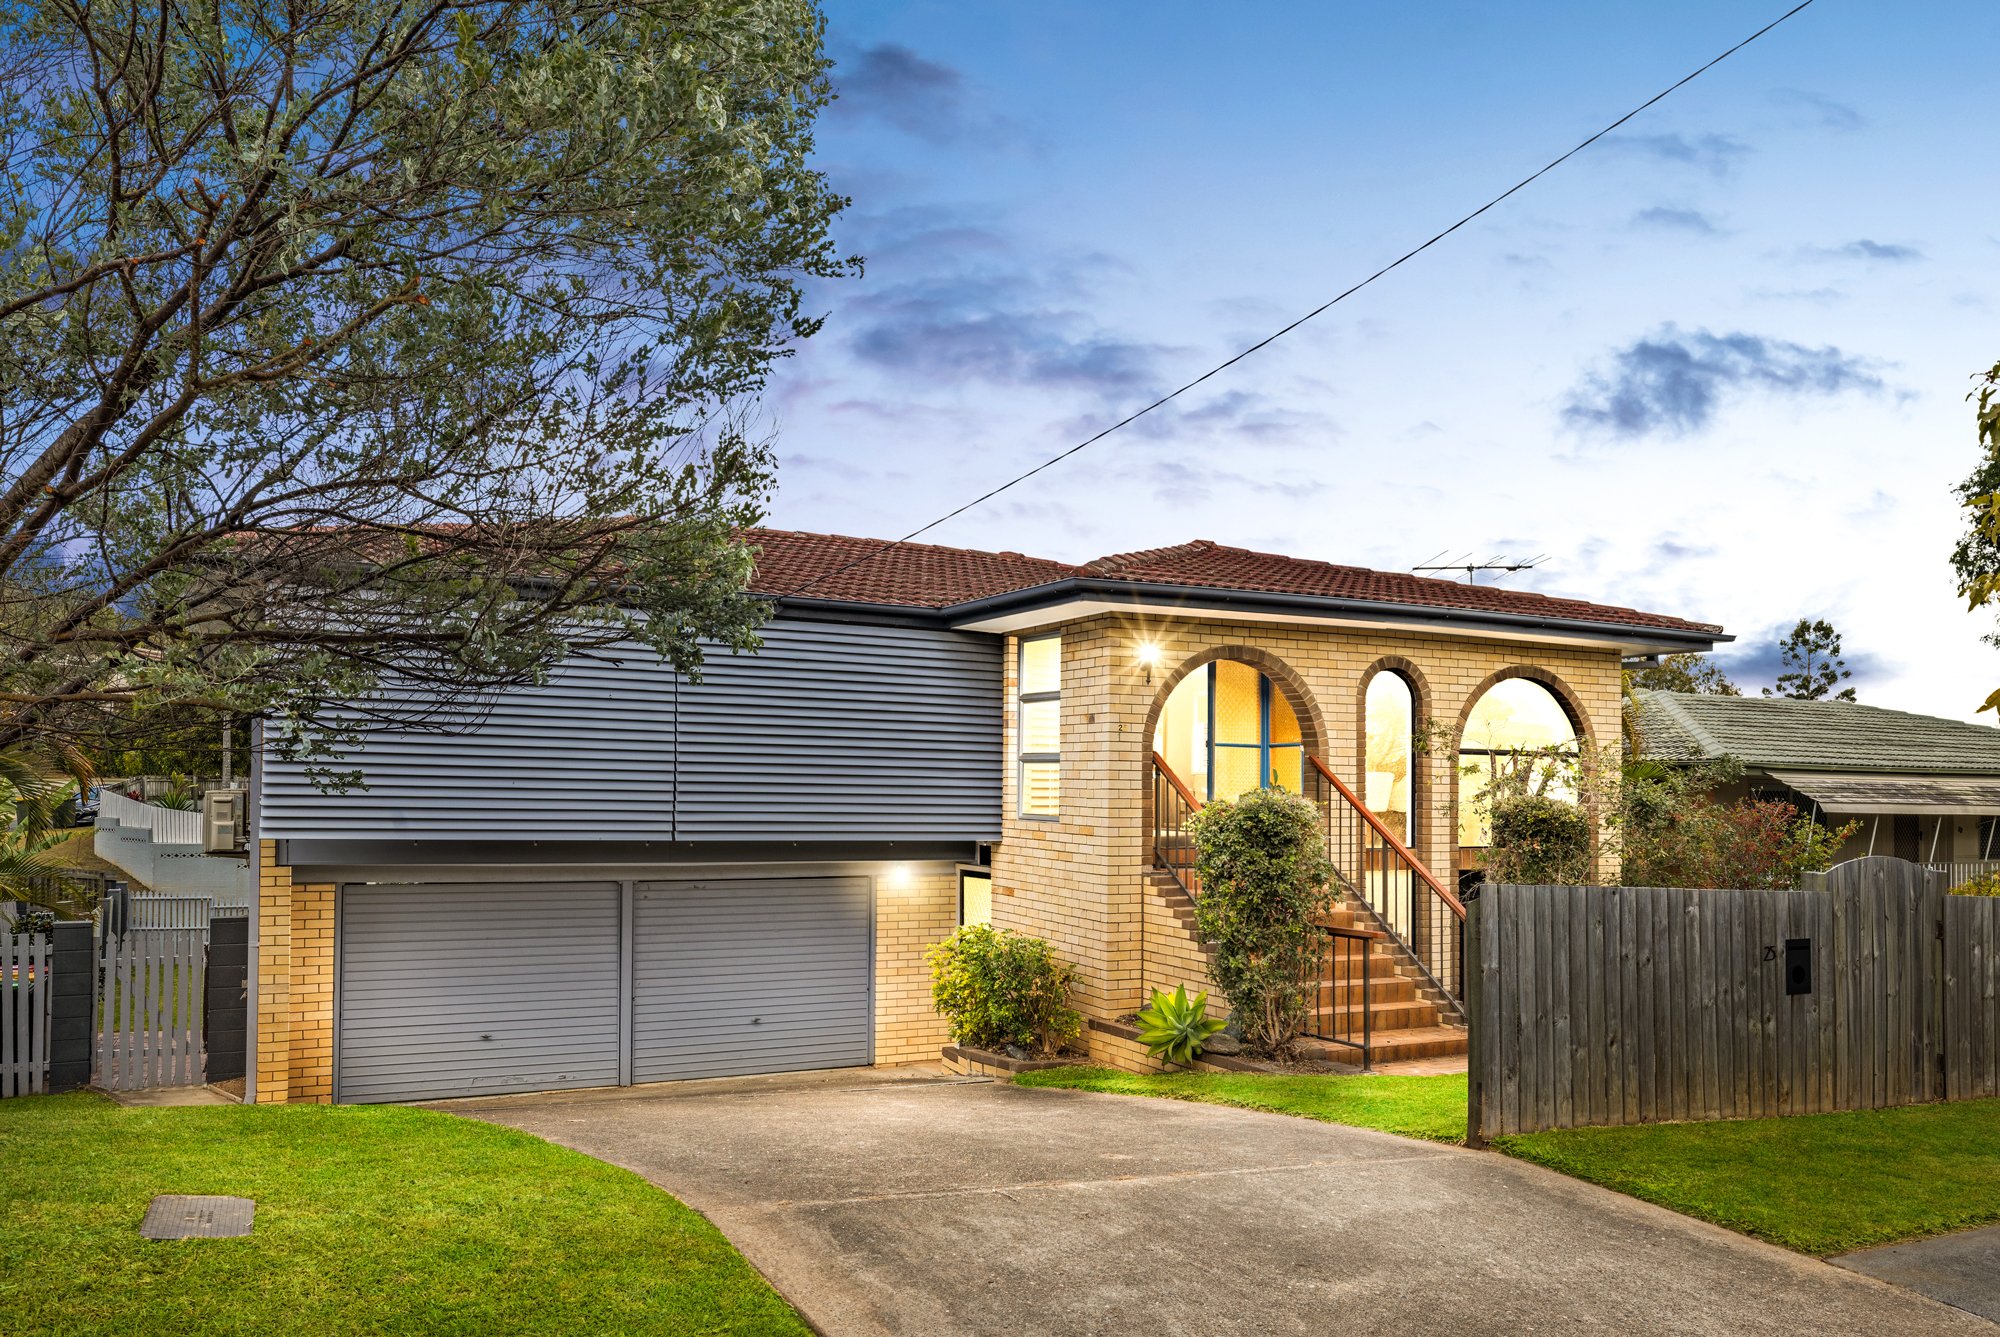 25 Ansford St Stafford Heights Hot Property Buyers Agency 29.jpg